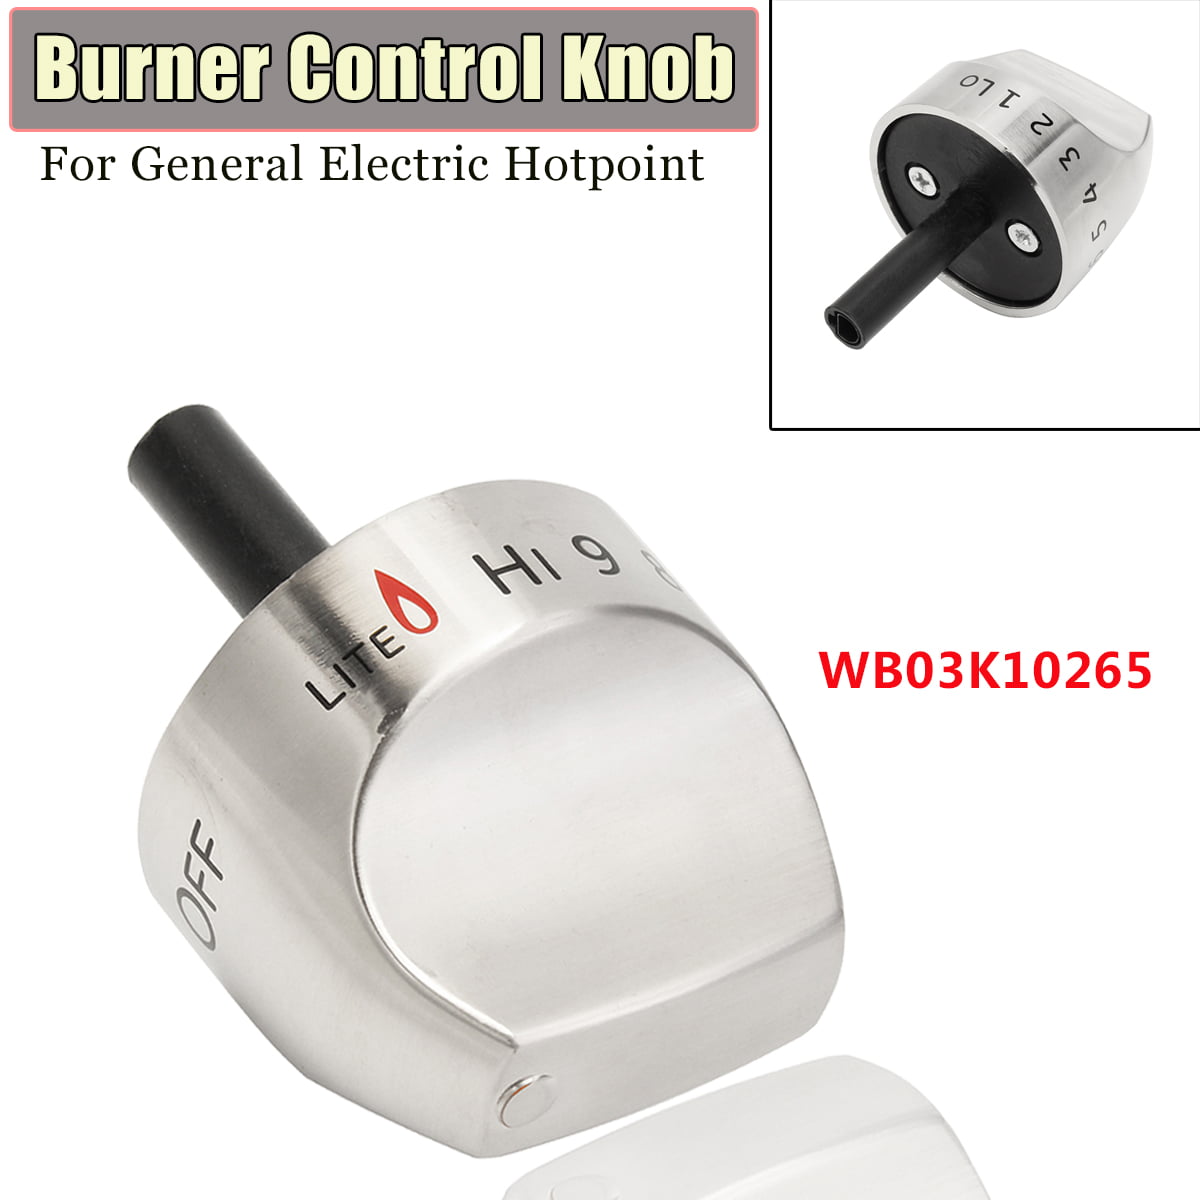 Cooker Top Burner Control Knob Switch fit for GE Hotpoint Range suit WB03K10265 